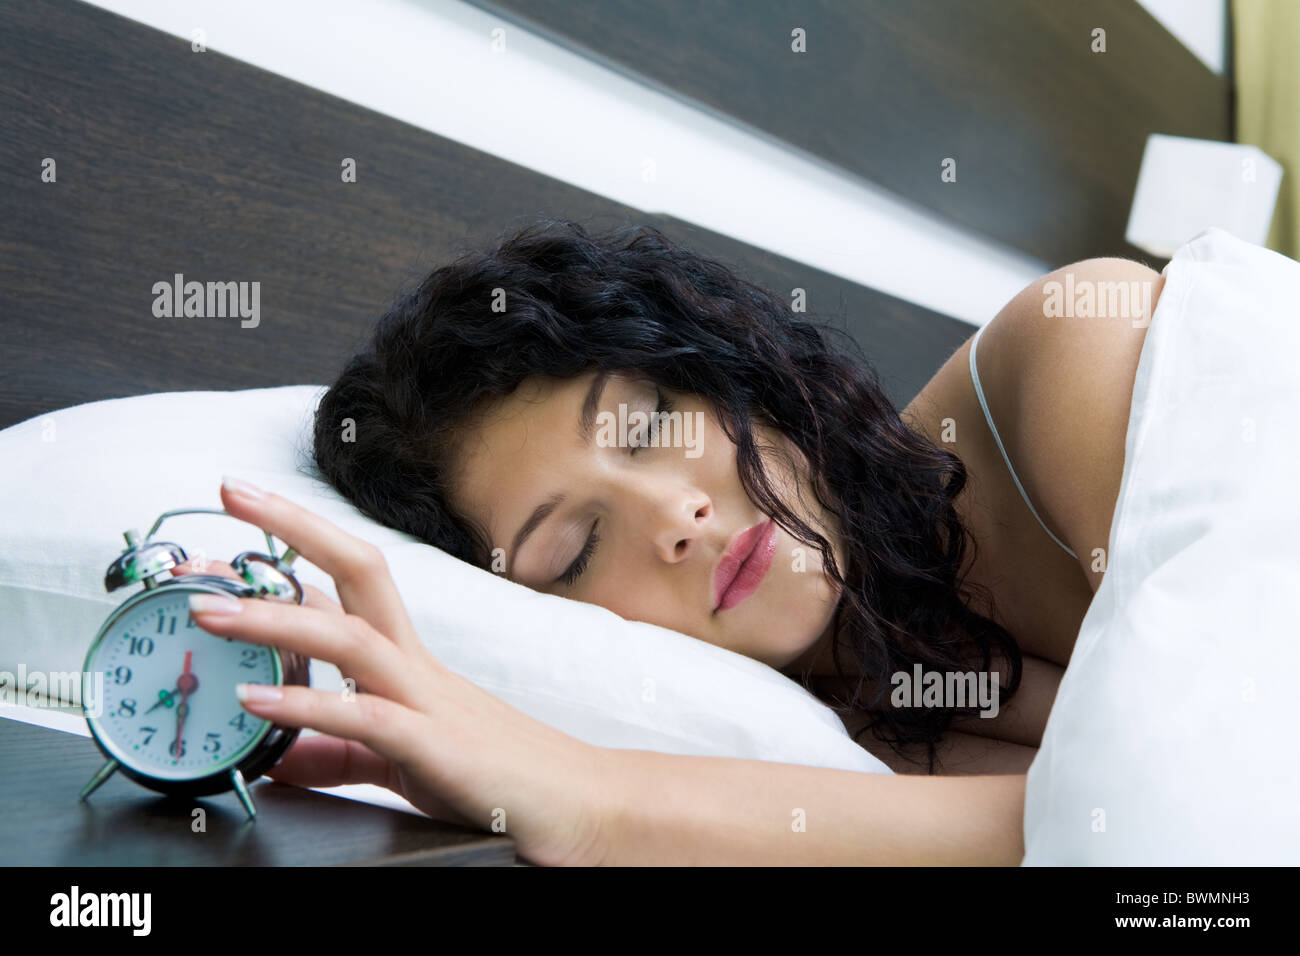 Image of female keeping her hand on top of alarm clock after awakening in the morning Stock Photo